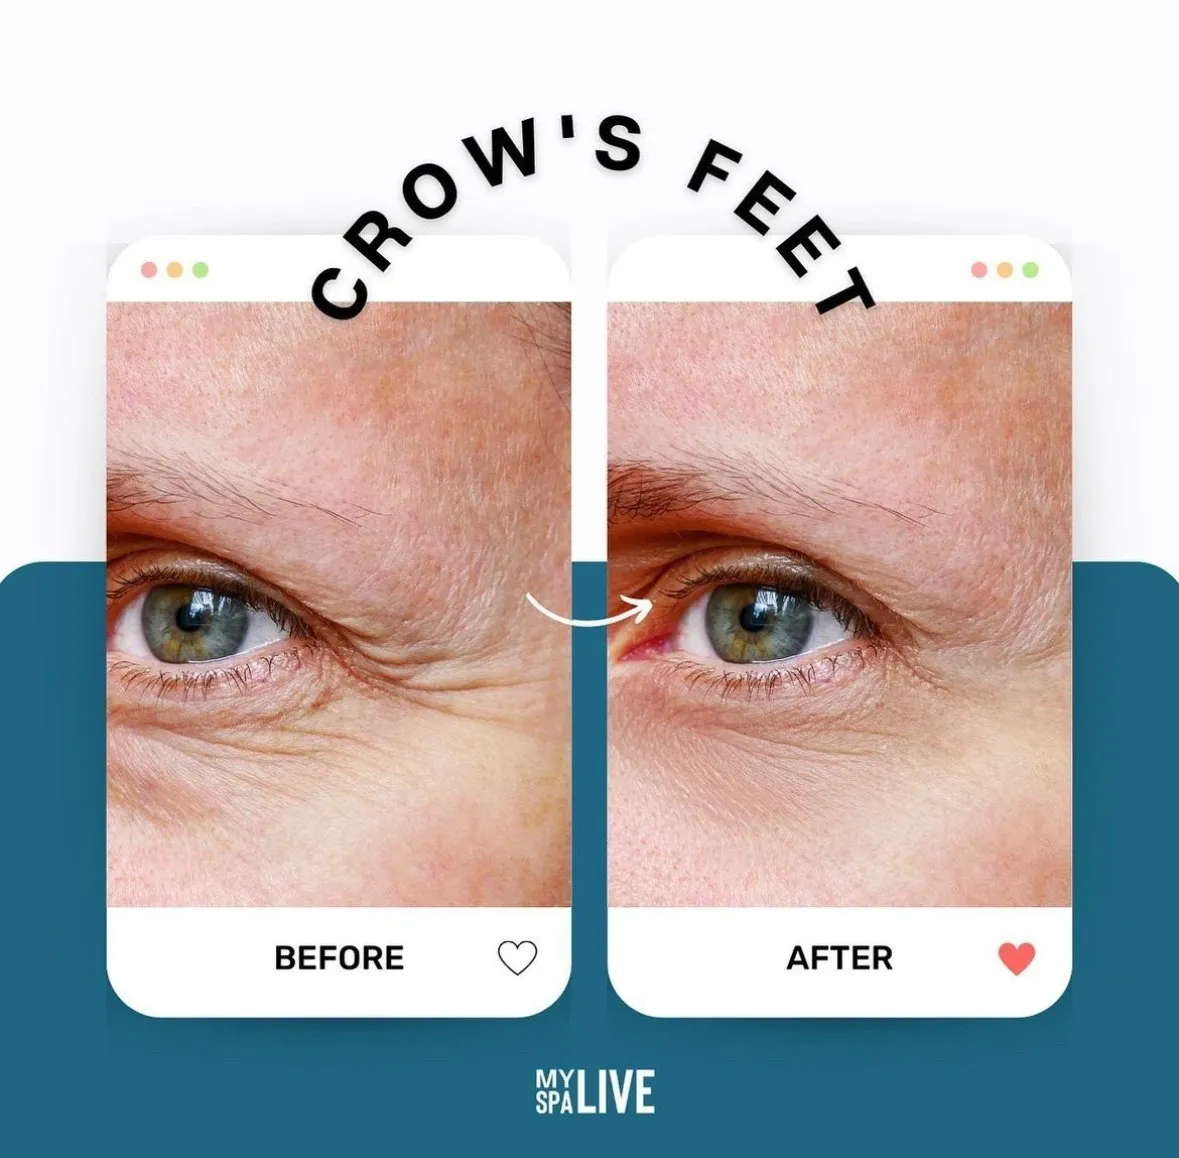 A person 's eye before and after crows feet